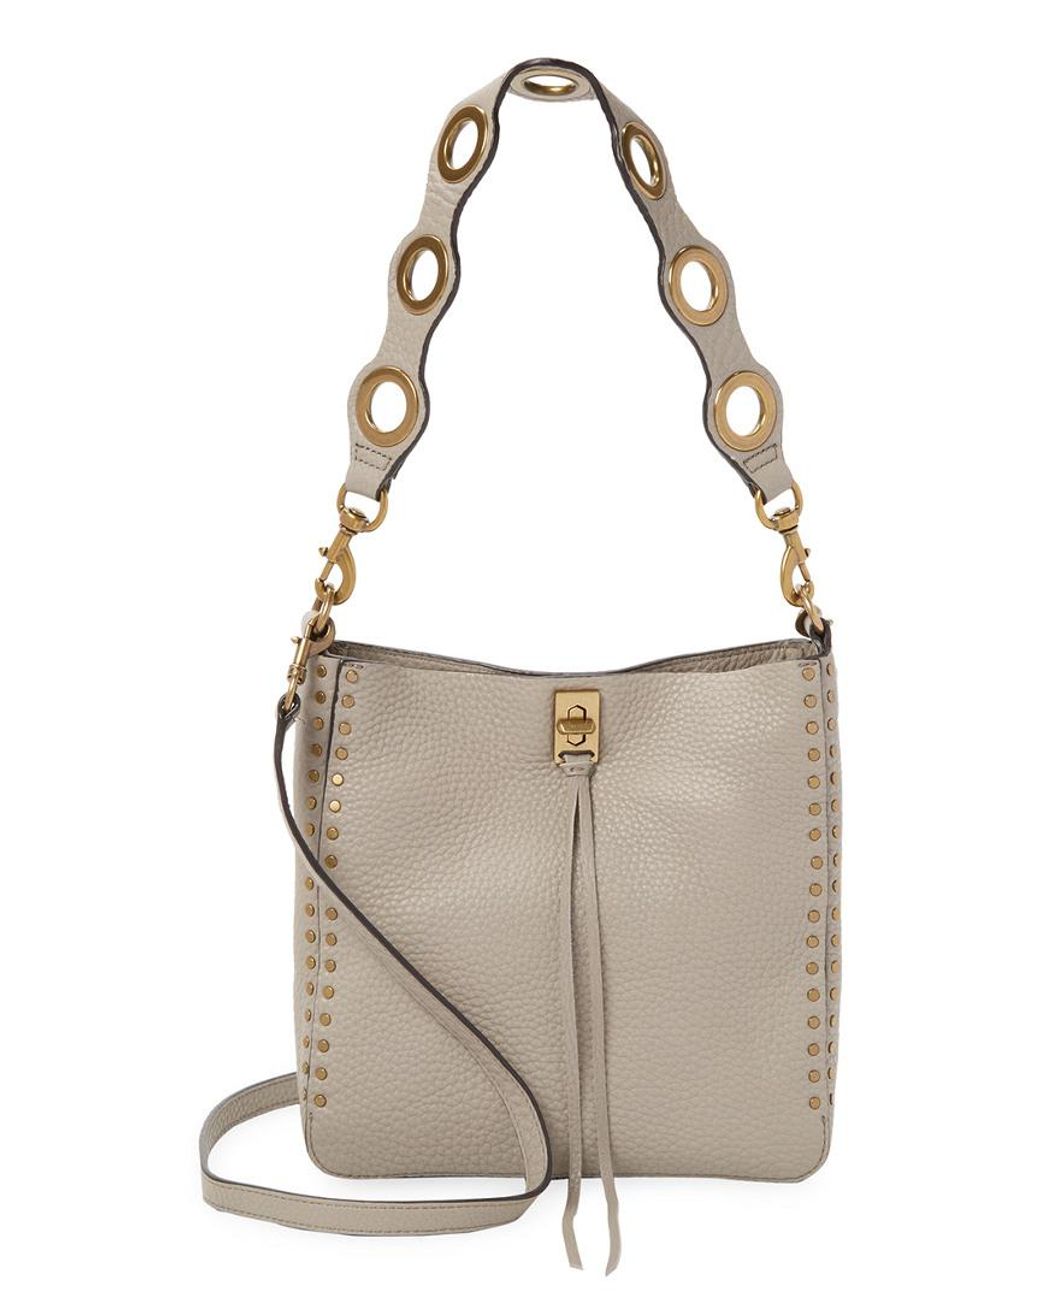 Details about   Rebecca Minkoff Small Darren Leather Feed Bag crossbody $245 